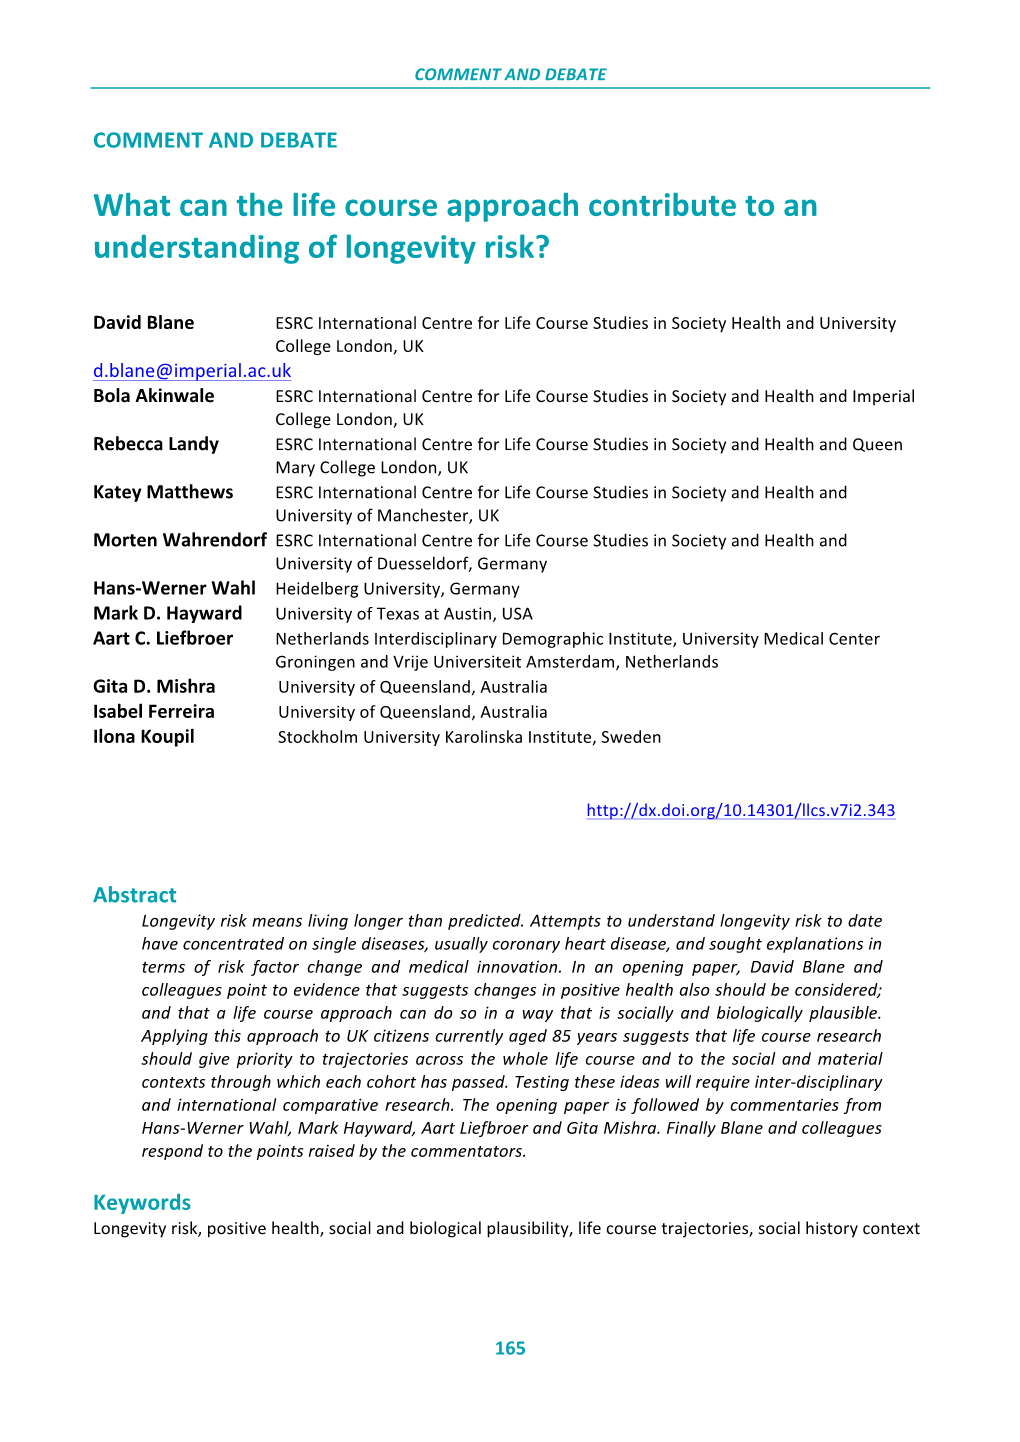 What Can the Life Course Approach Contribute to an Understanding of Longevity Risk?